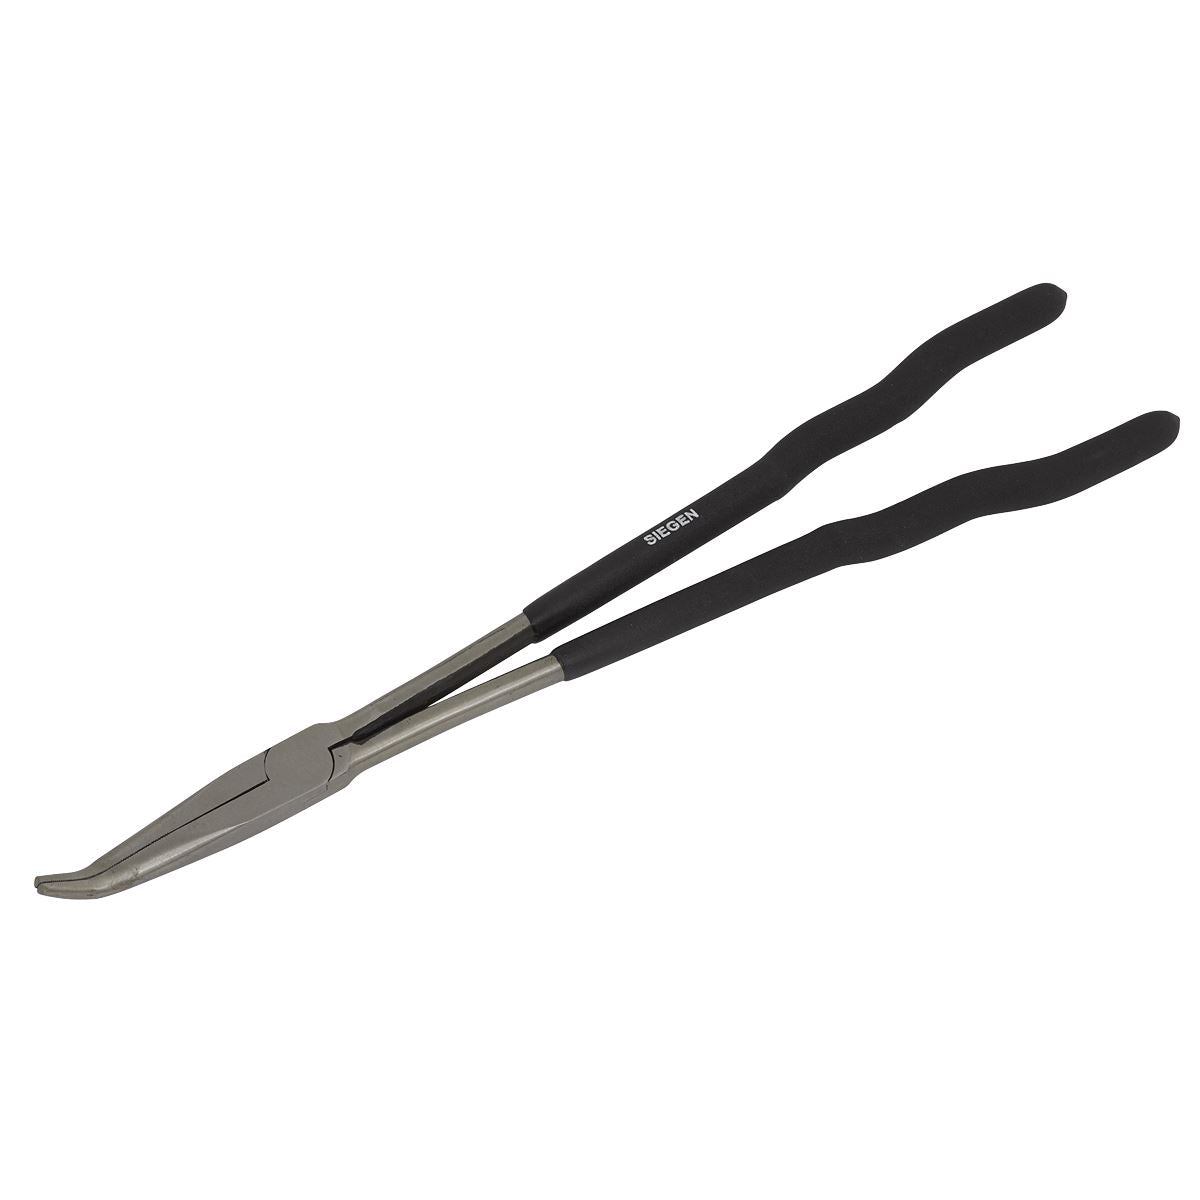 Siegen by Sealey Needle Nose Pliers Extra-Long 400mm 45°